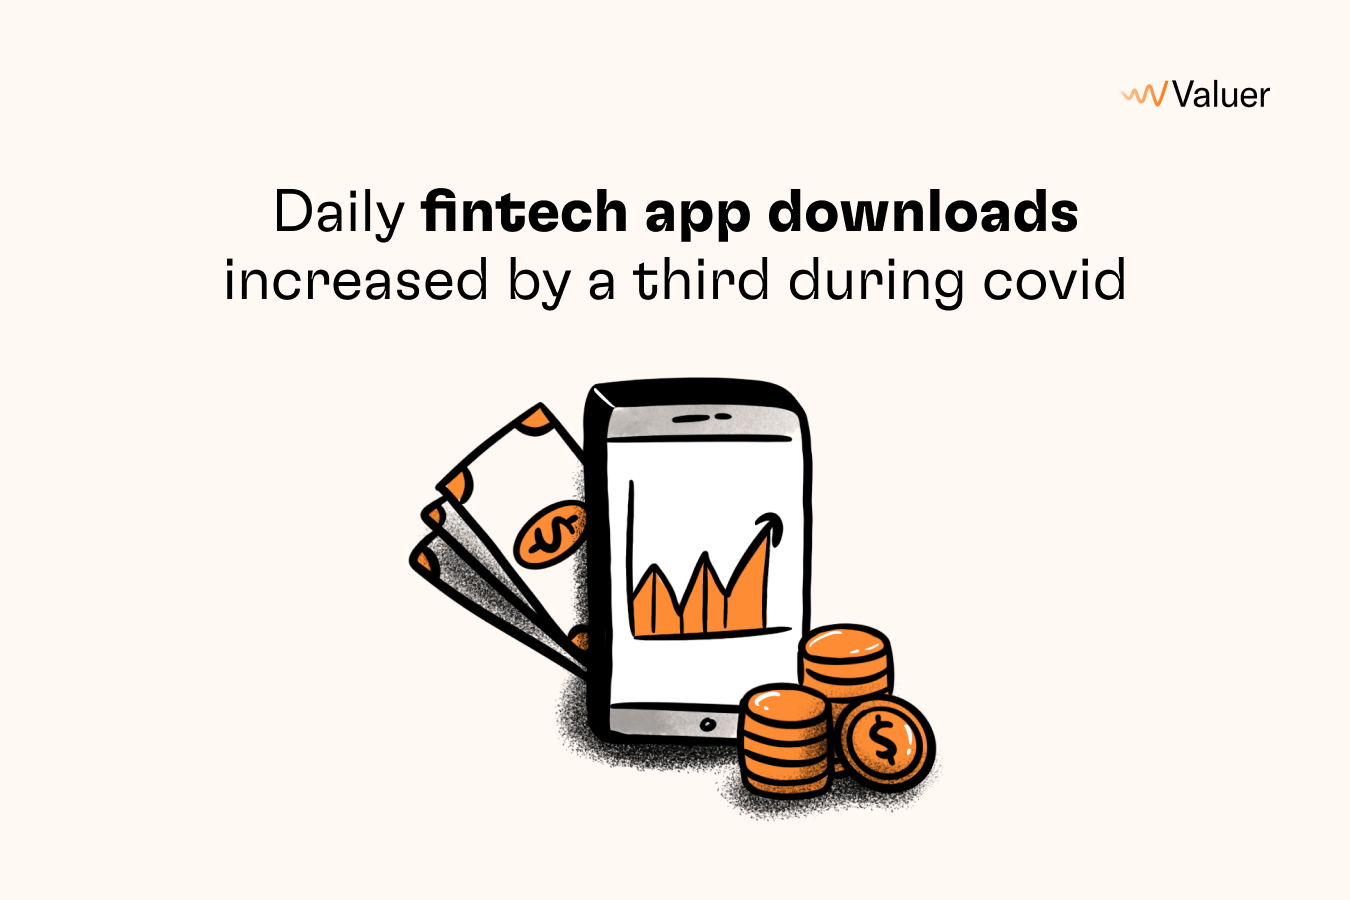 Daily fintech app downloads increased by a third during COVID